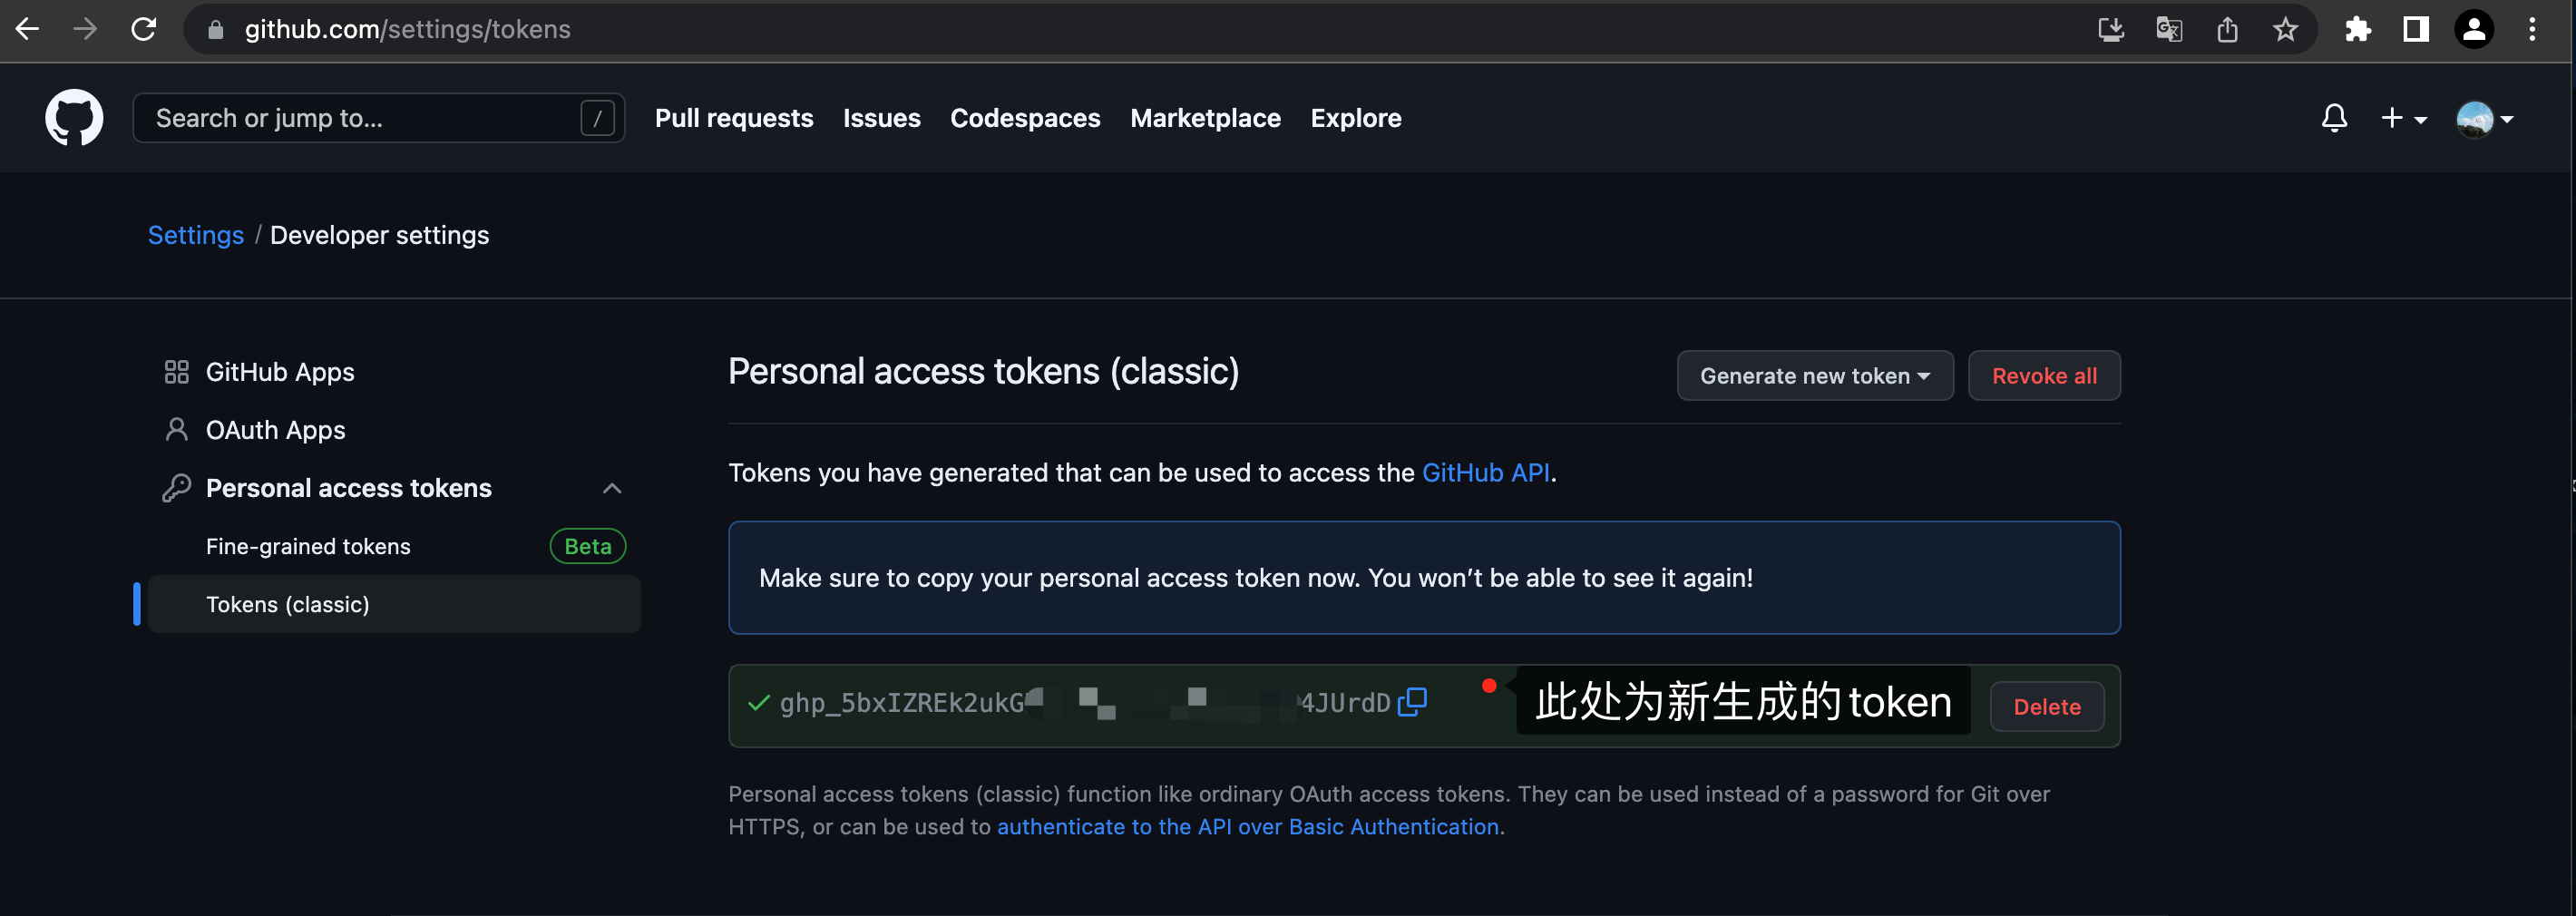 Mac系统brew报错“The GitHub credentials in the macOS keychain may be invalid”解决